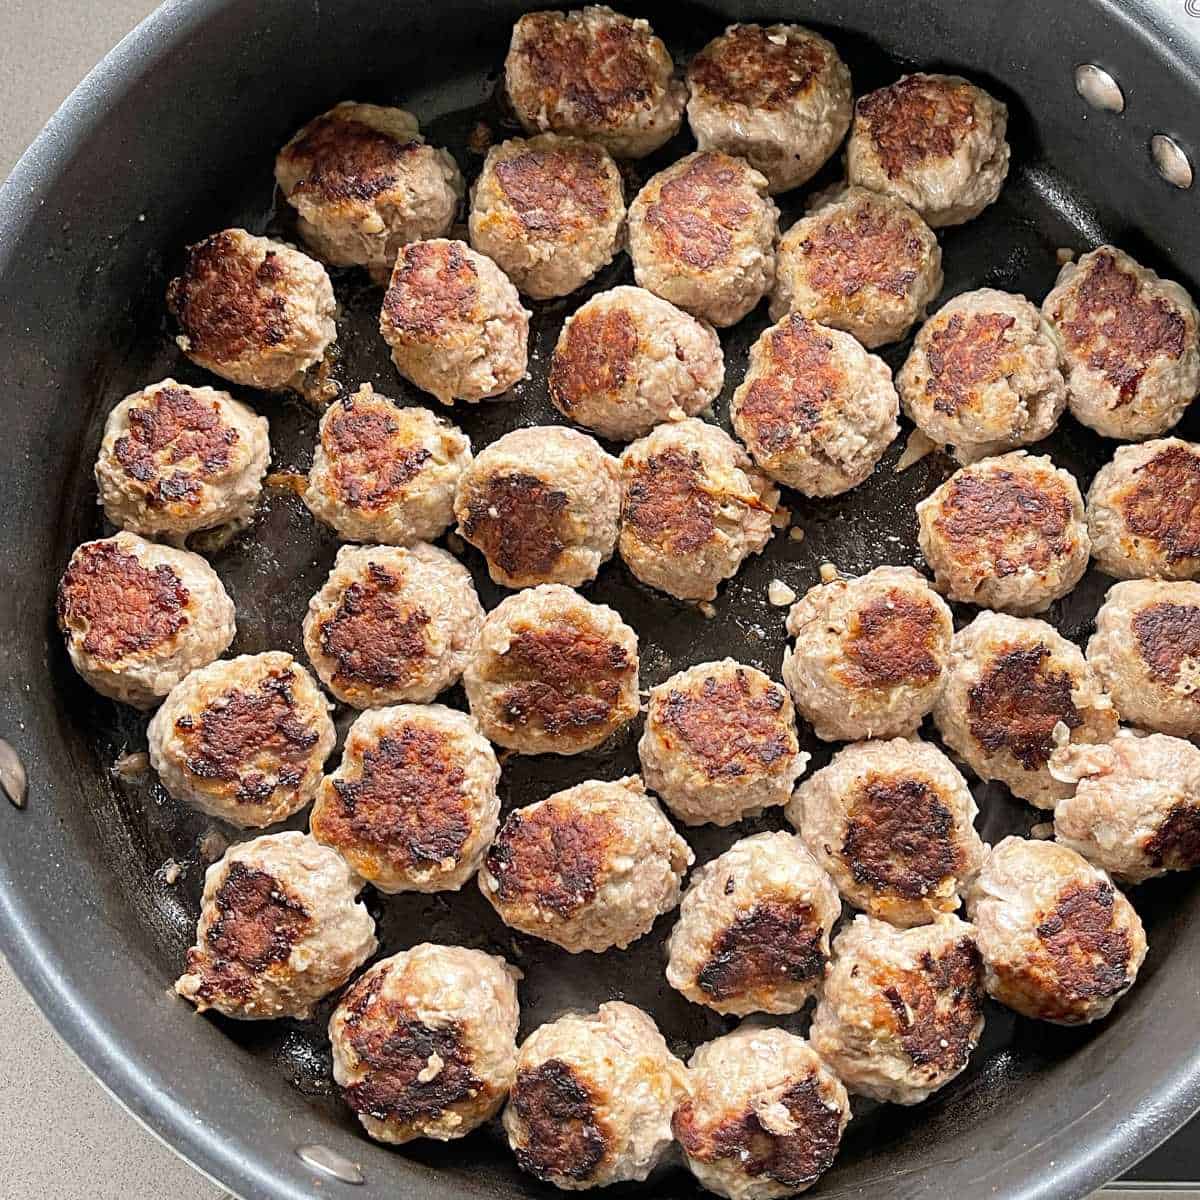 Cooked meatballs in a fry pan